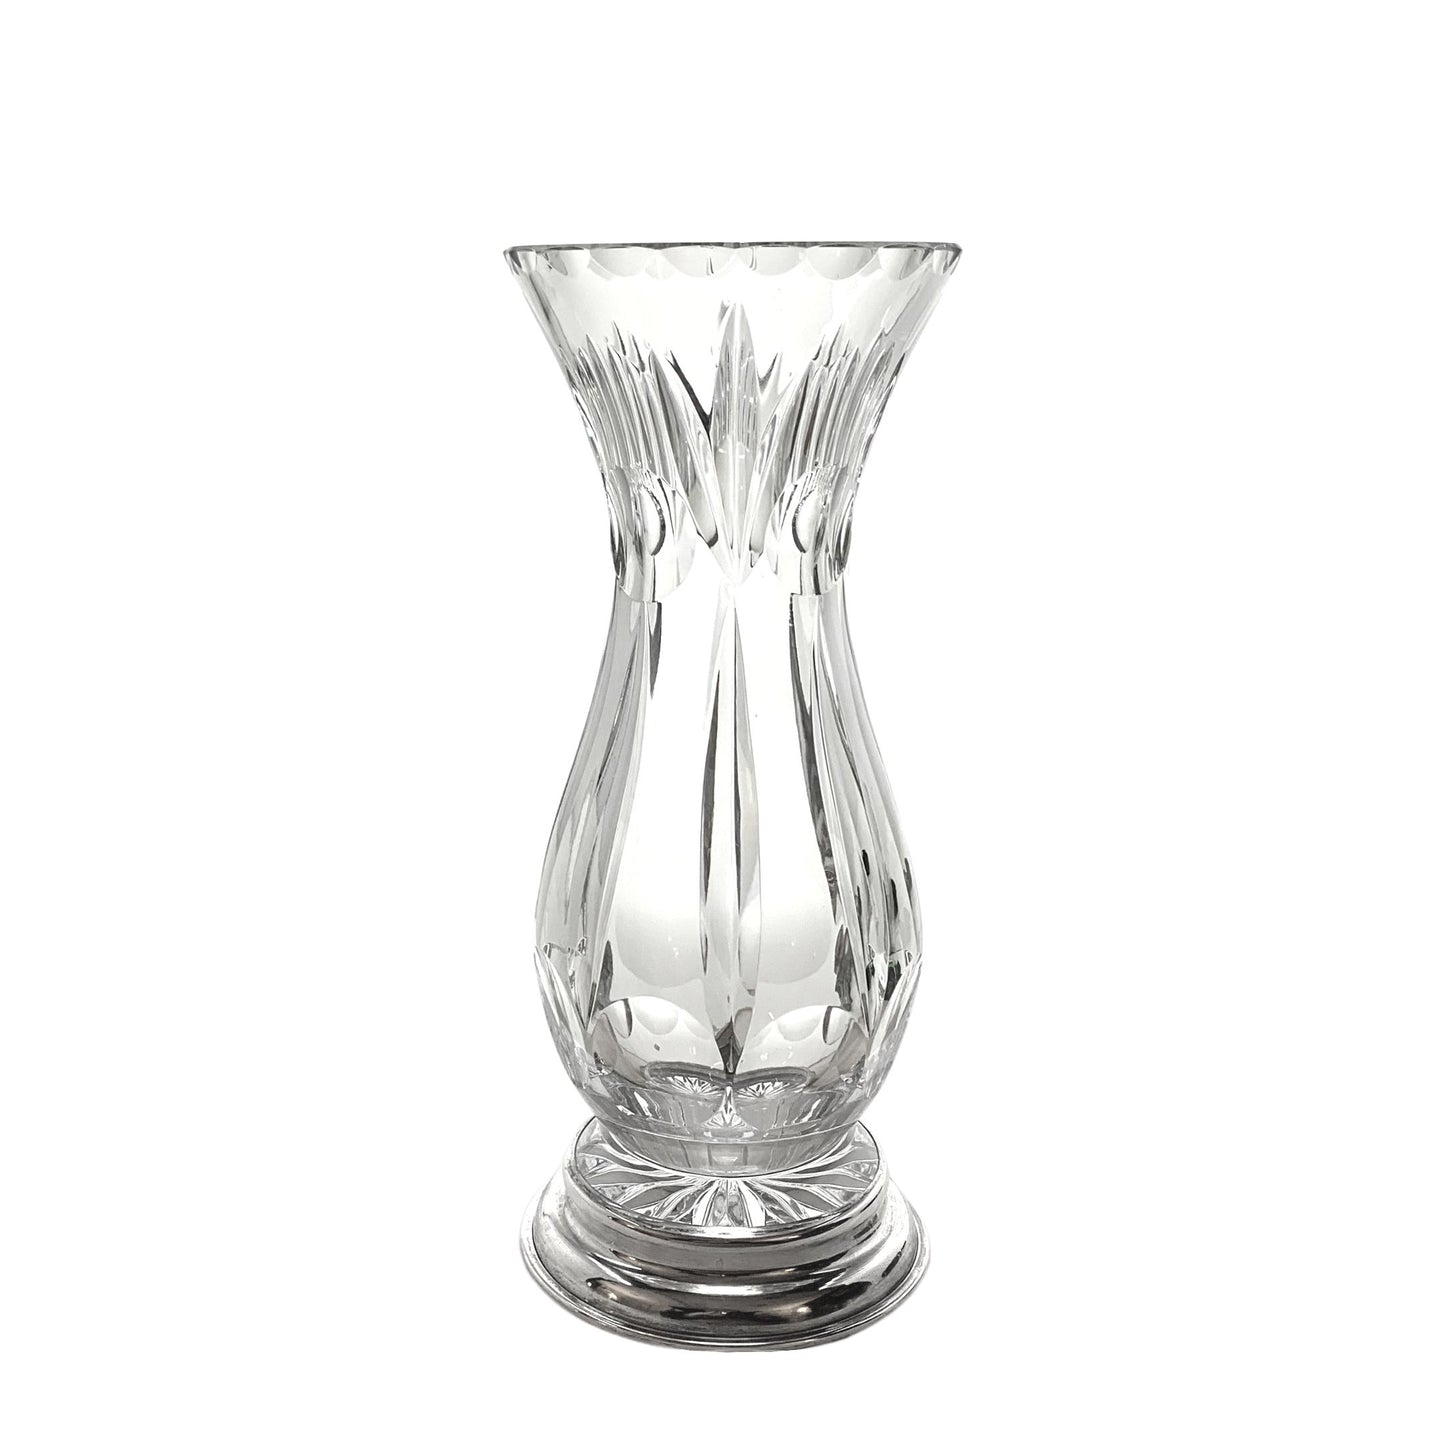 William Hutton & Sons 1915 Crystal/ Sterling Vase